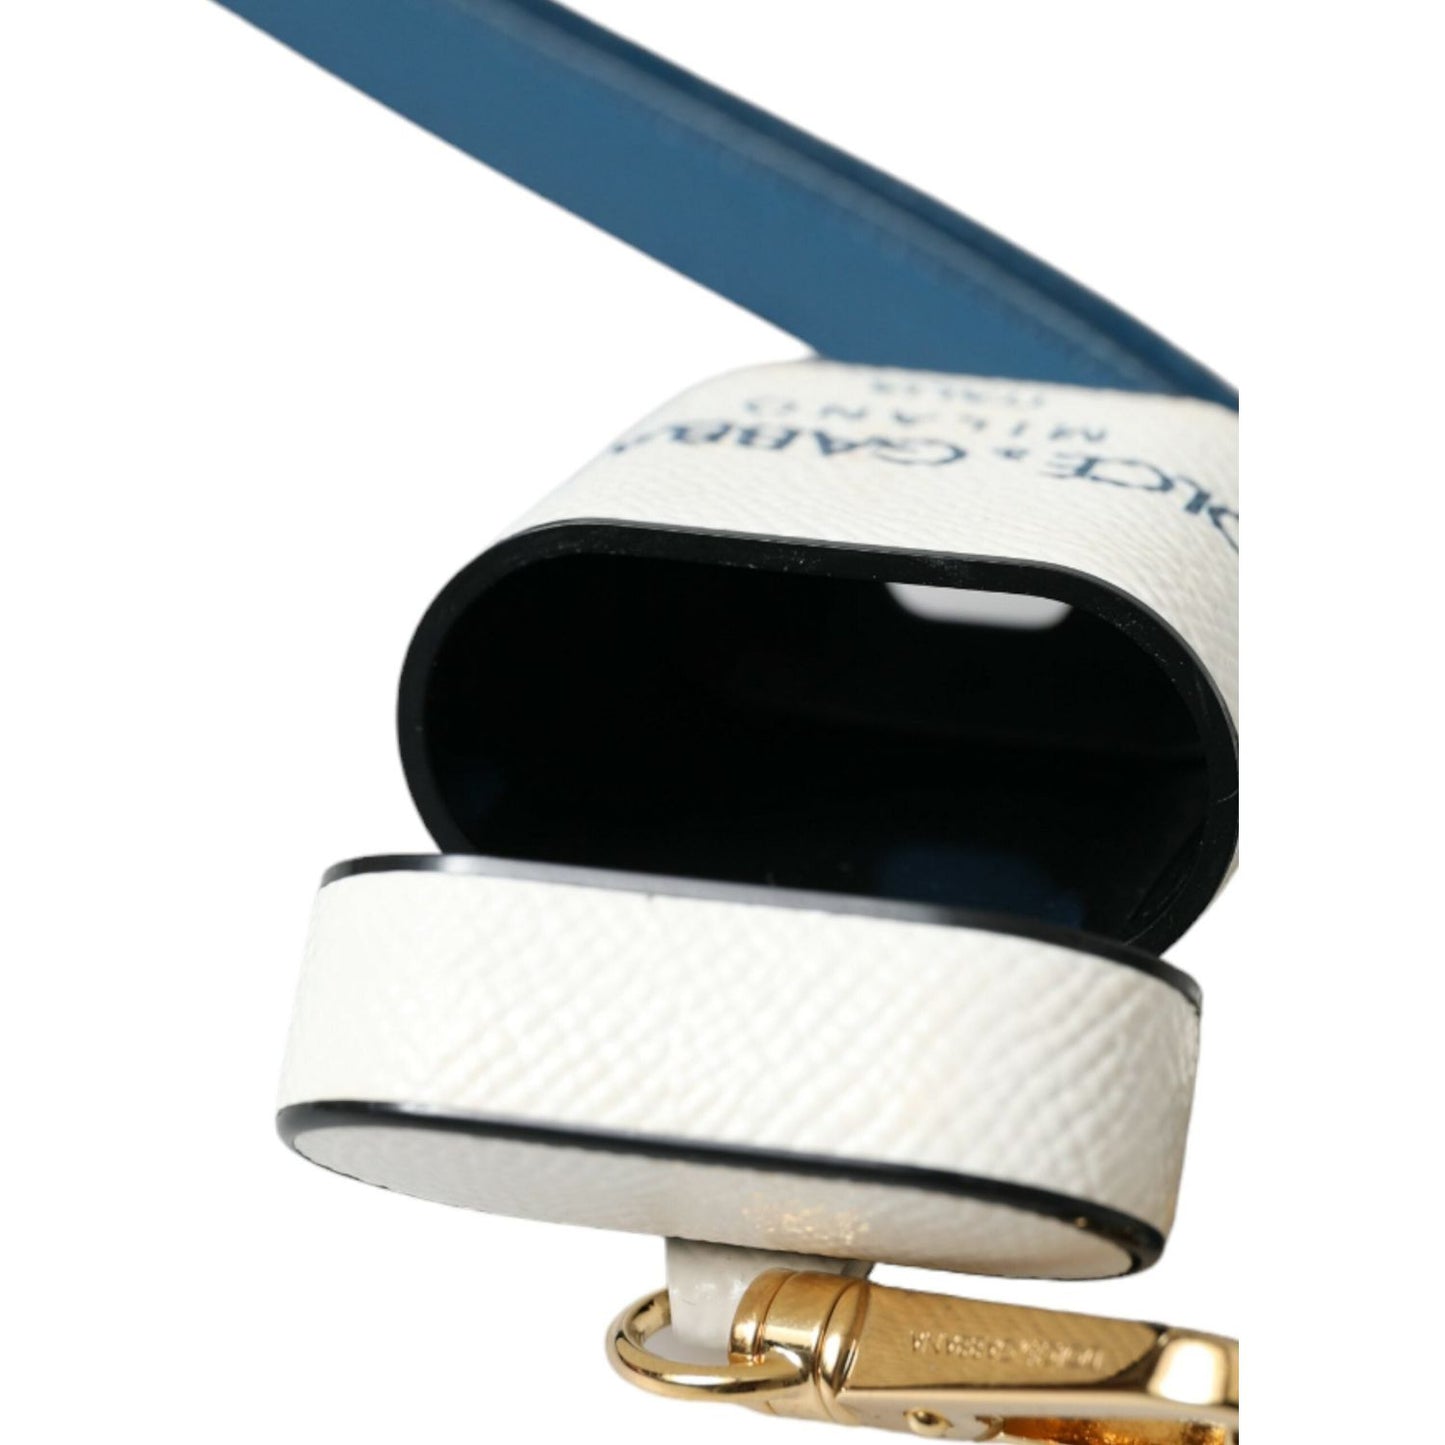 Dolce & Gabbana Chic Leather Airpods Case in Blue & White chic-leather-airpods-case-in-blue-white